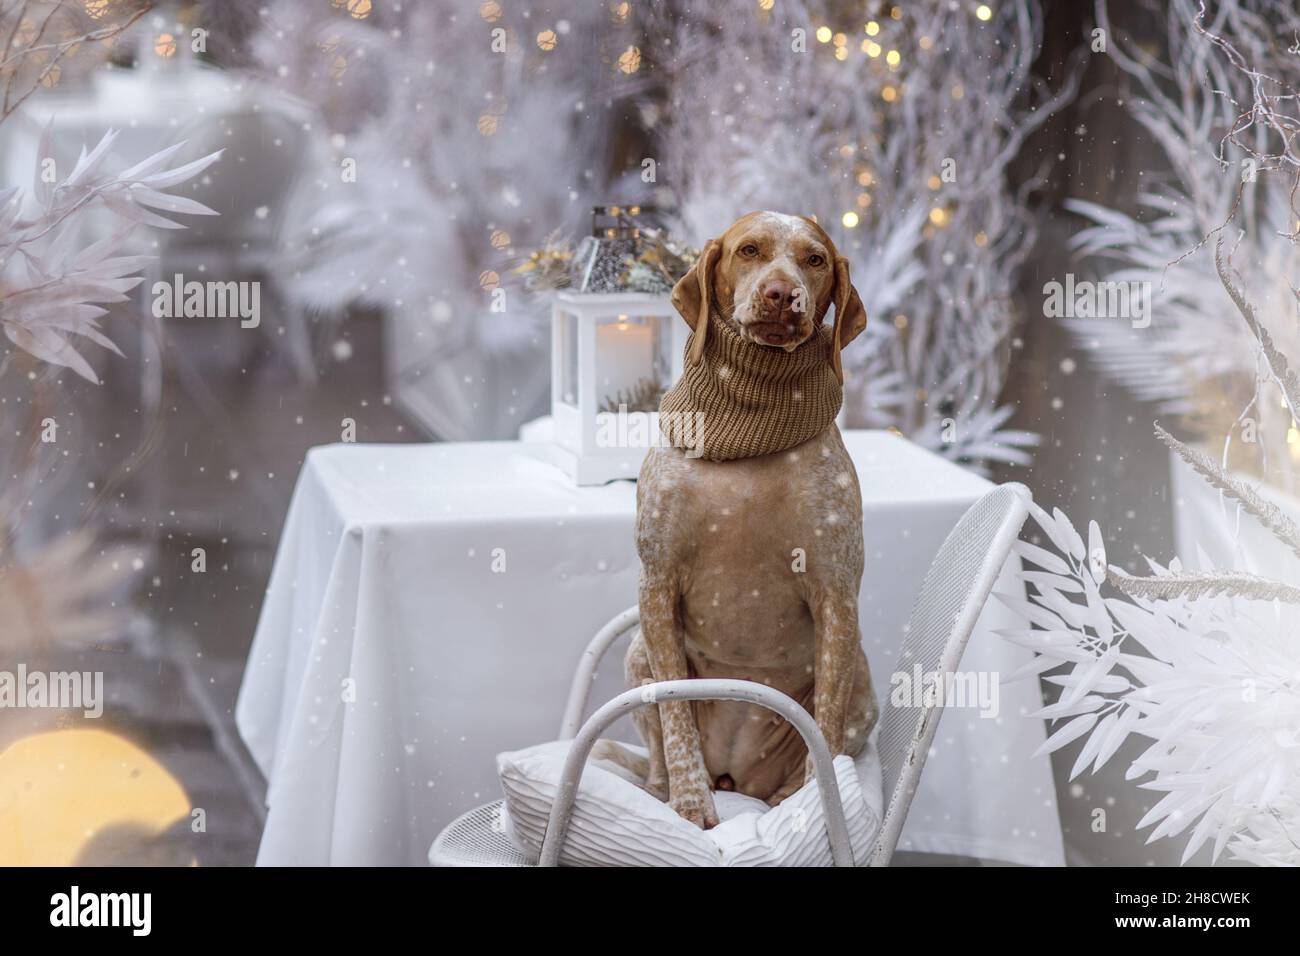 New year and Christmas concept with Braque Du Bourbonnais dog in snow Stock Photo